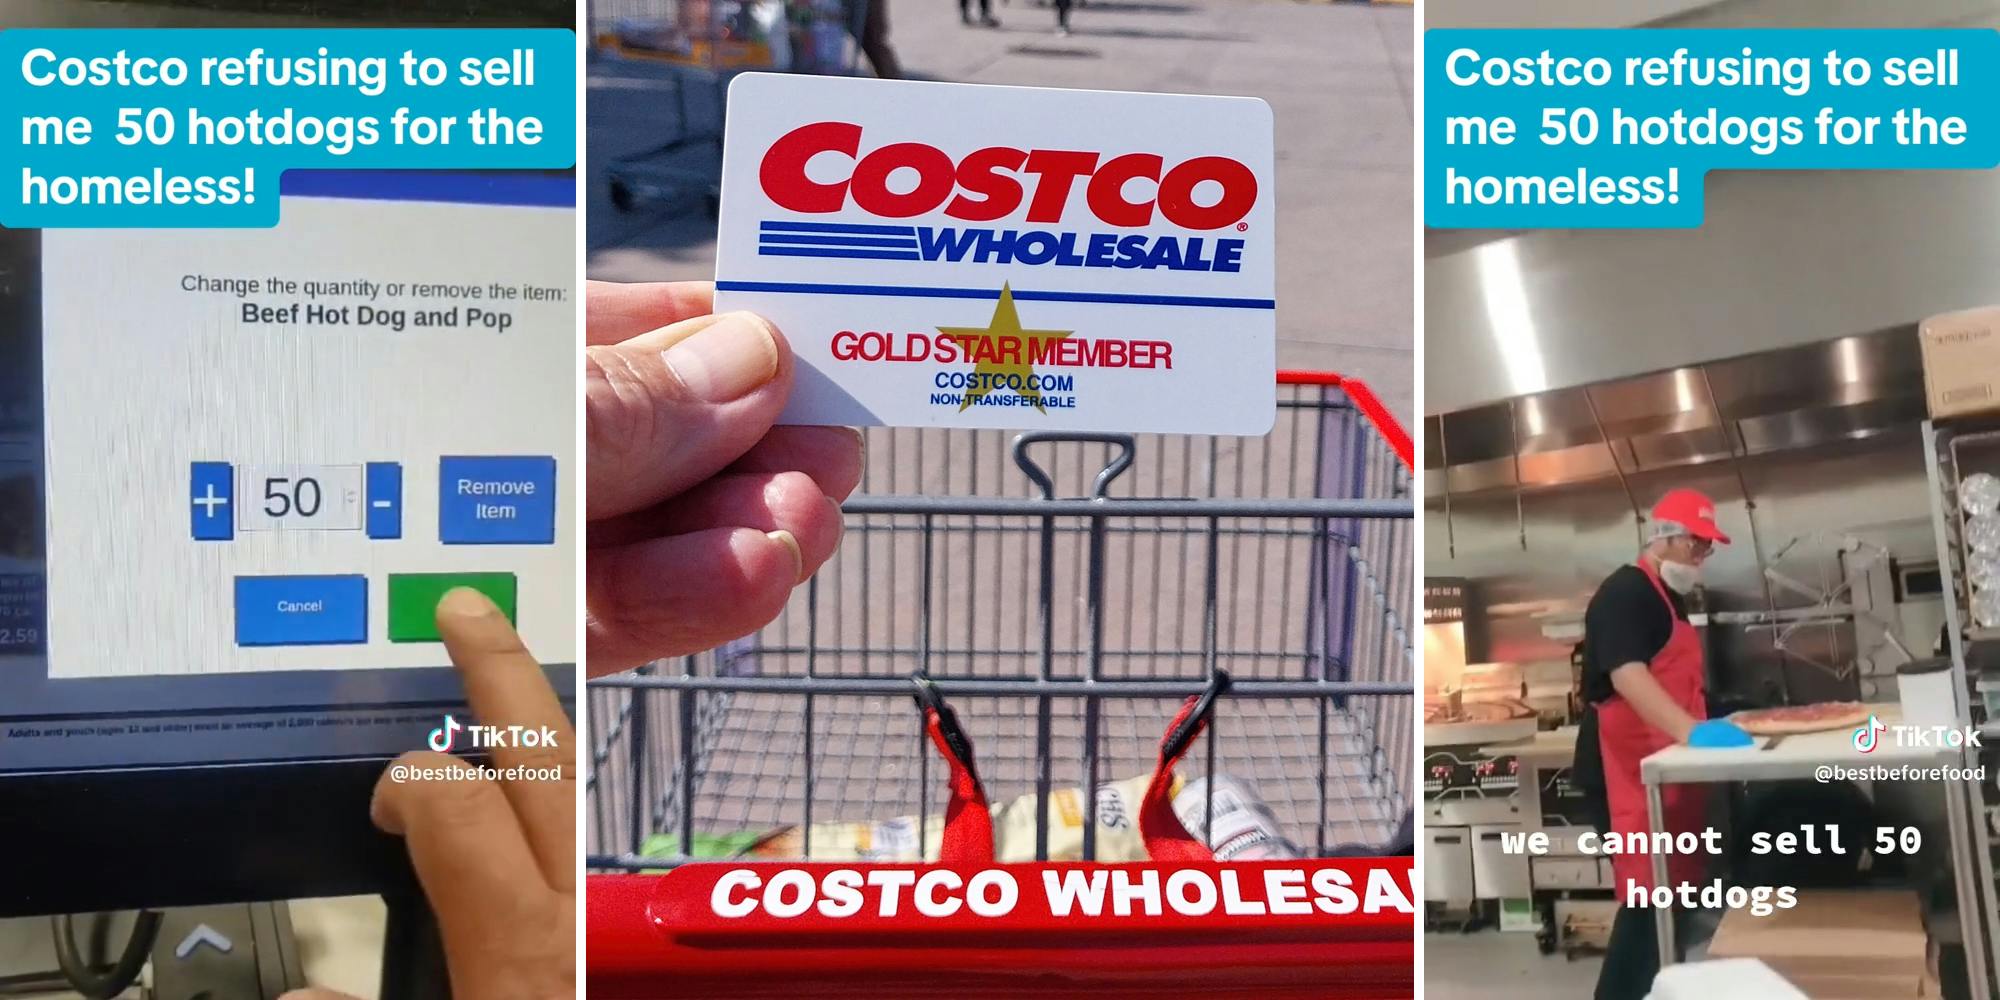 man ordering 50 hot dogs (l) costco wholesale card (c) costco worker with caption "we cannot sell 50 hotdogs" (r)